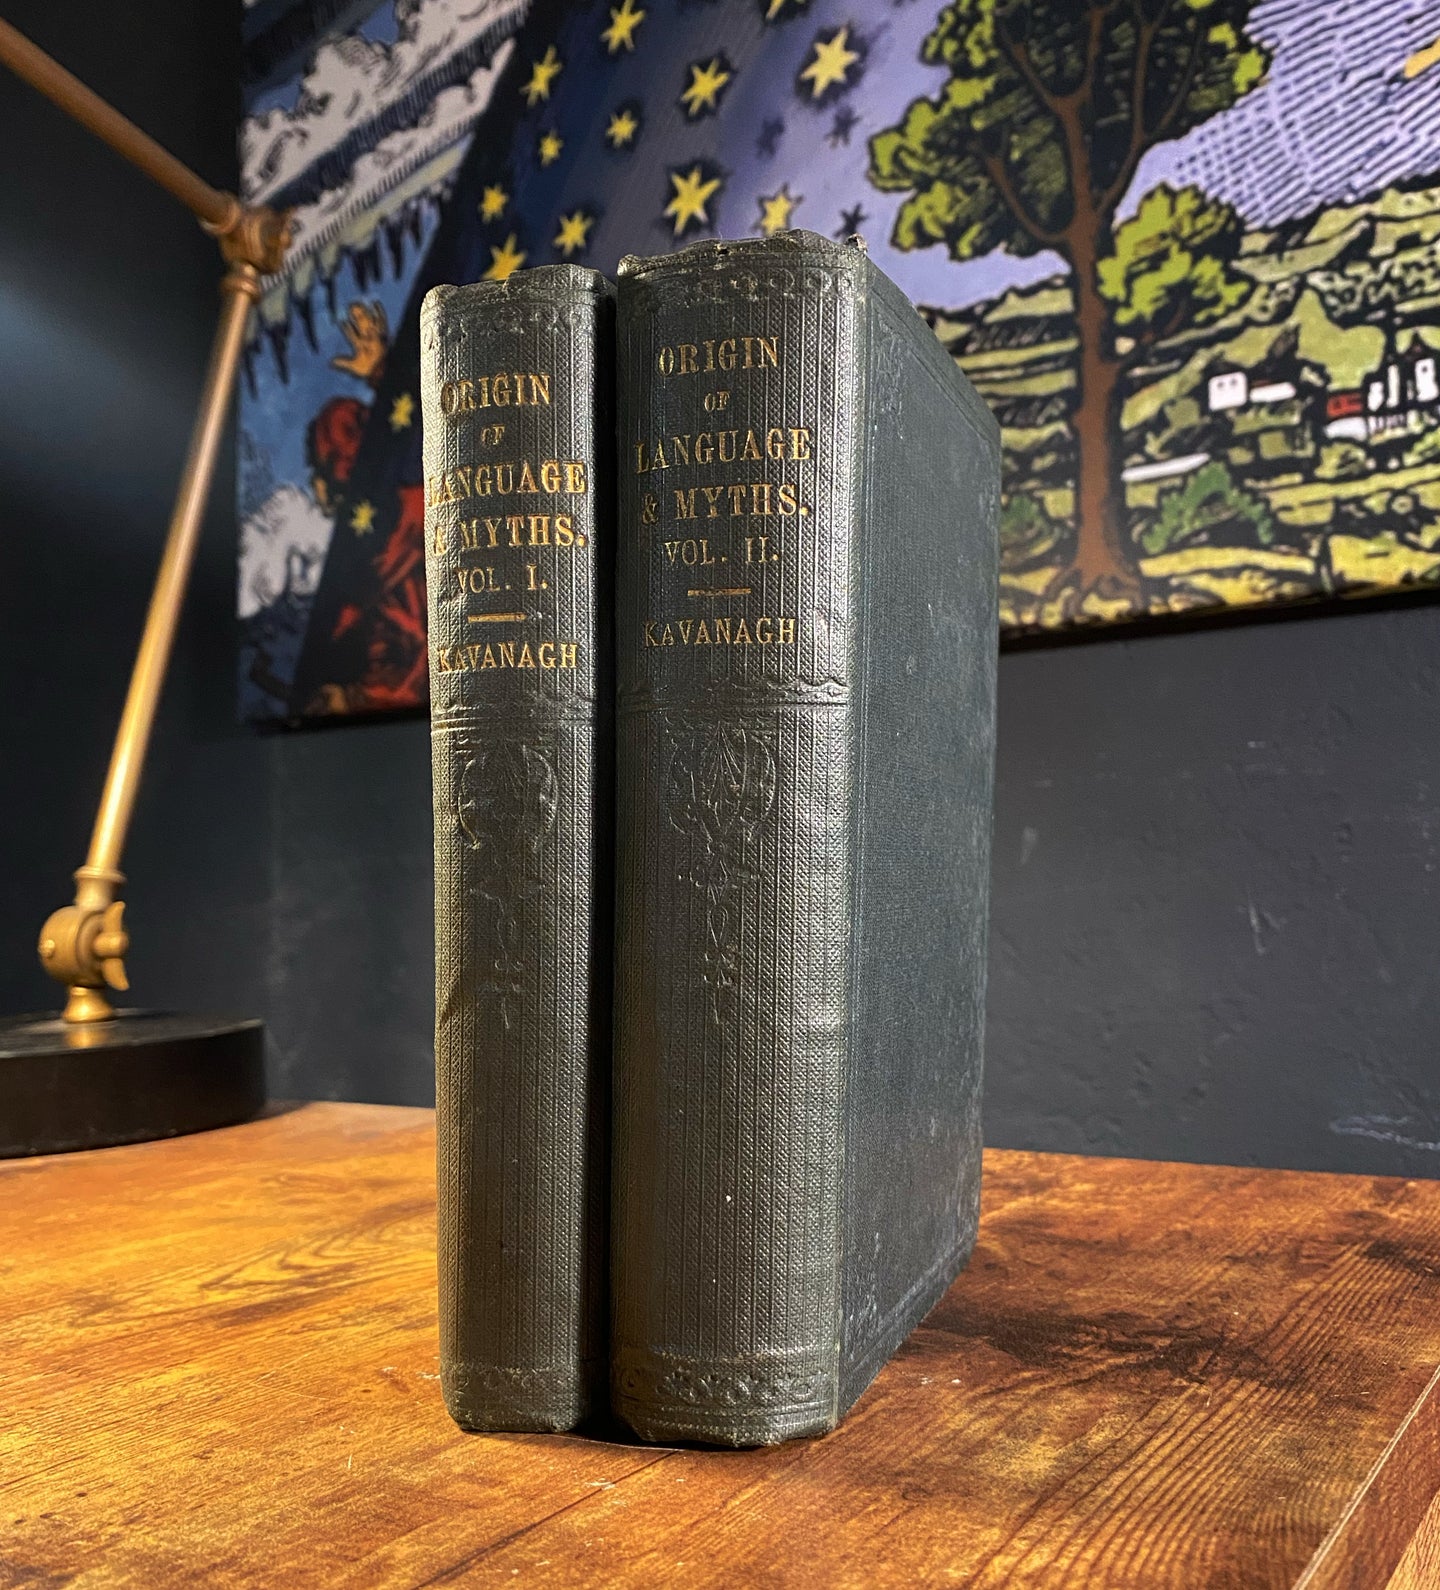 The Origin and Language of Myth by Kavanagh (1871 First Edition)